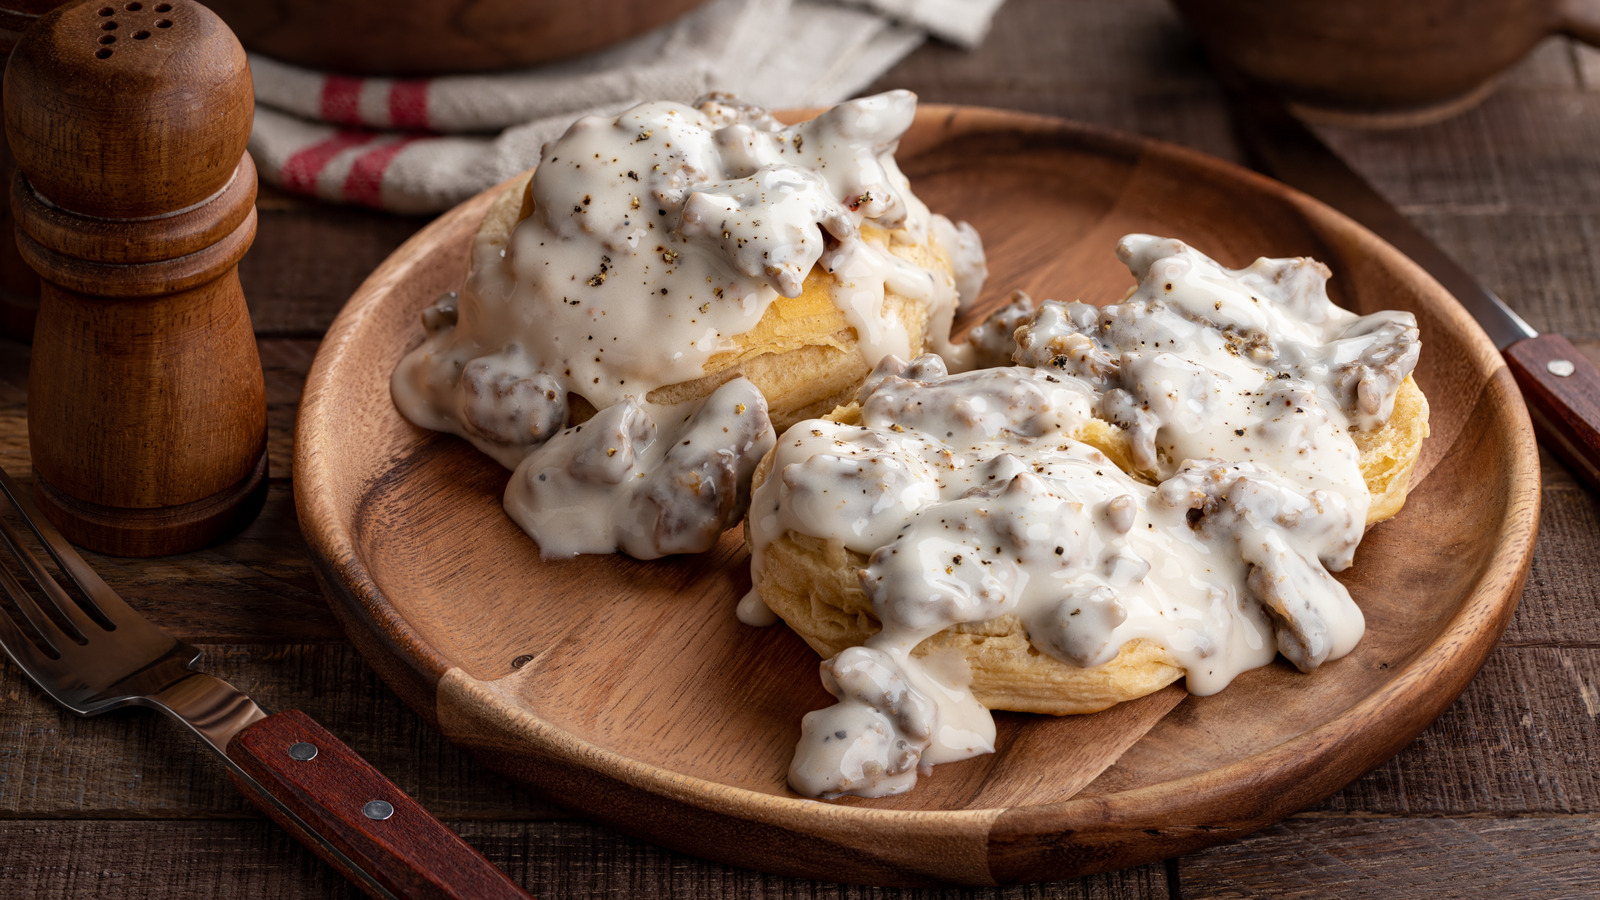 Dutch Oven Biscuits And Gravy - The Backyard Pioneer